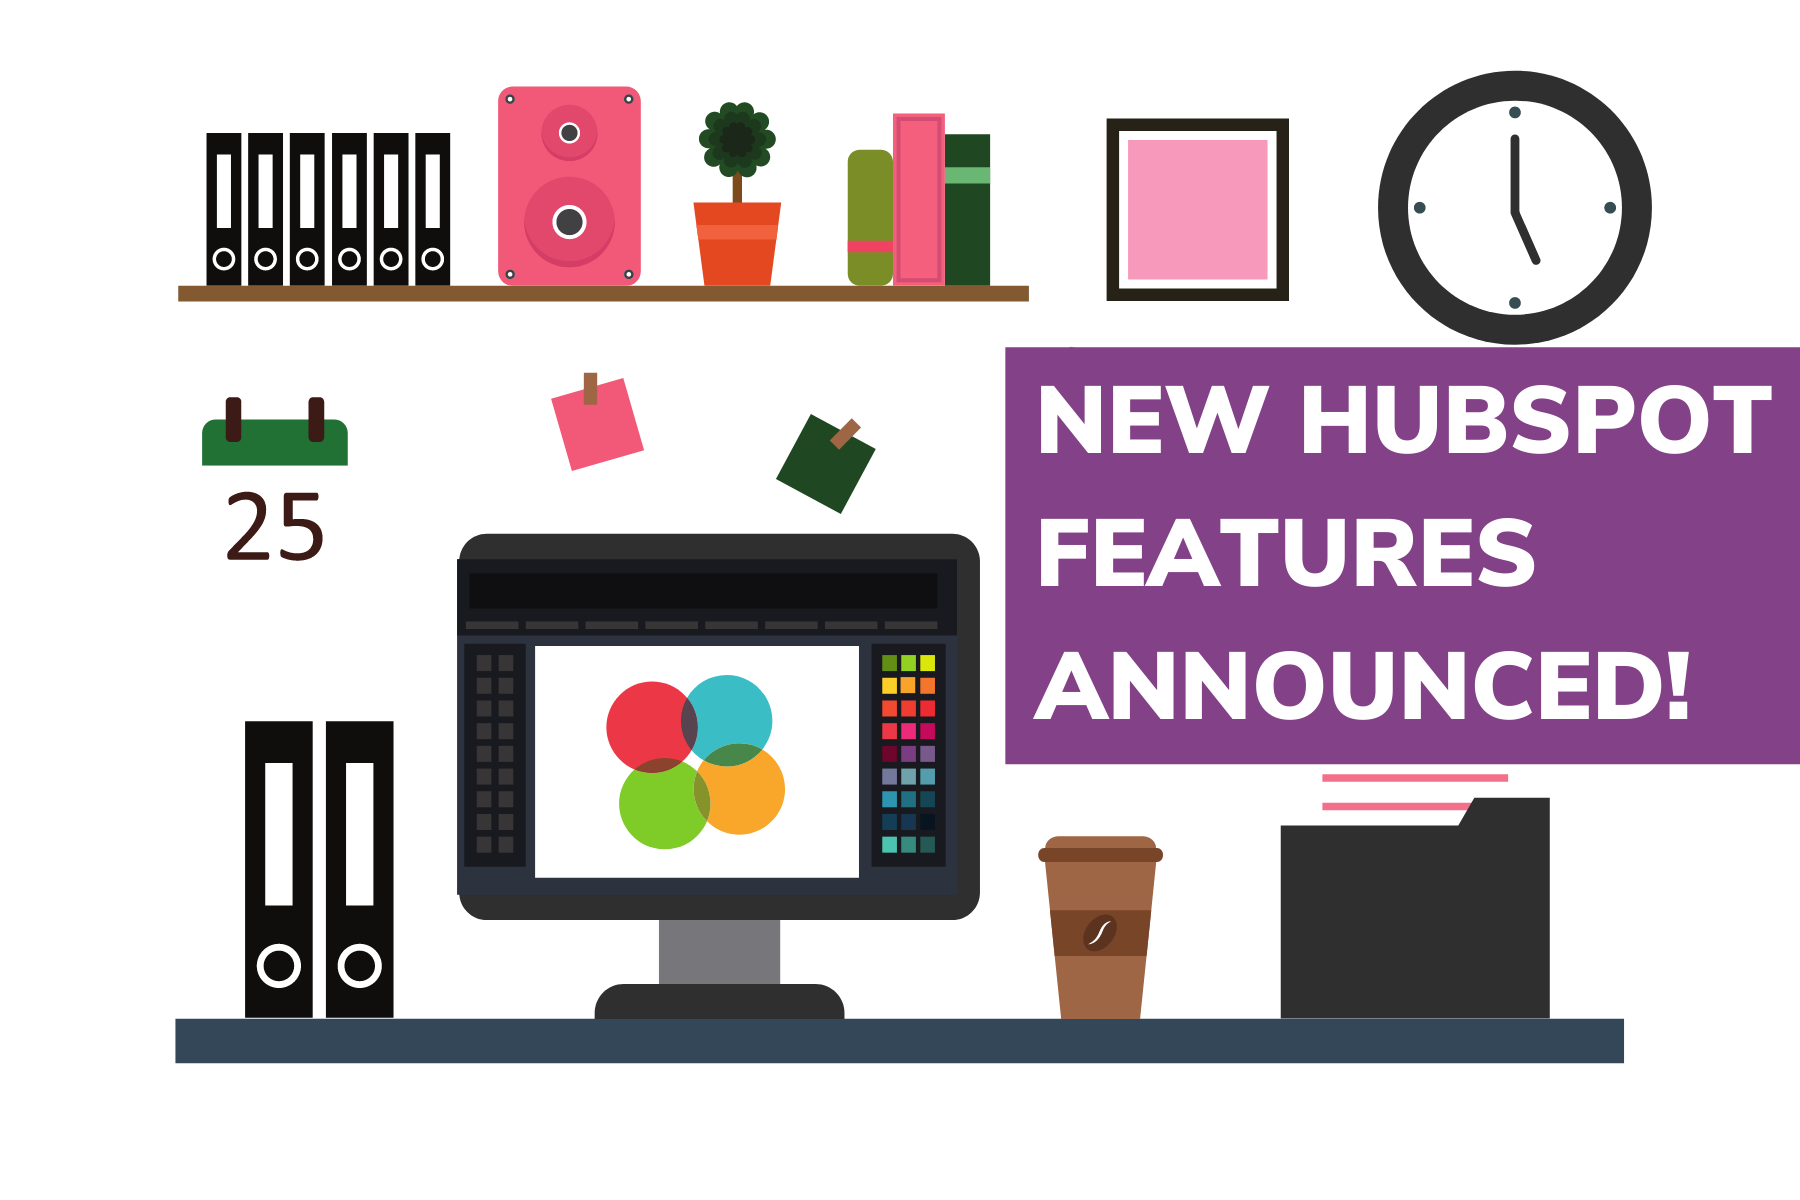 New HubSpot features announced!